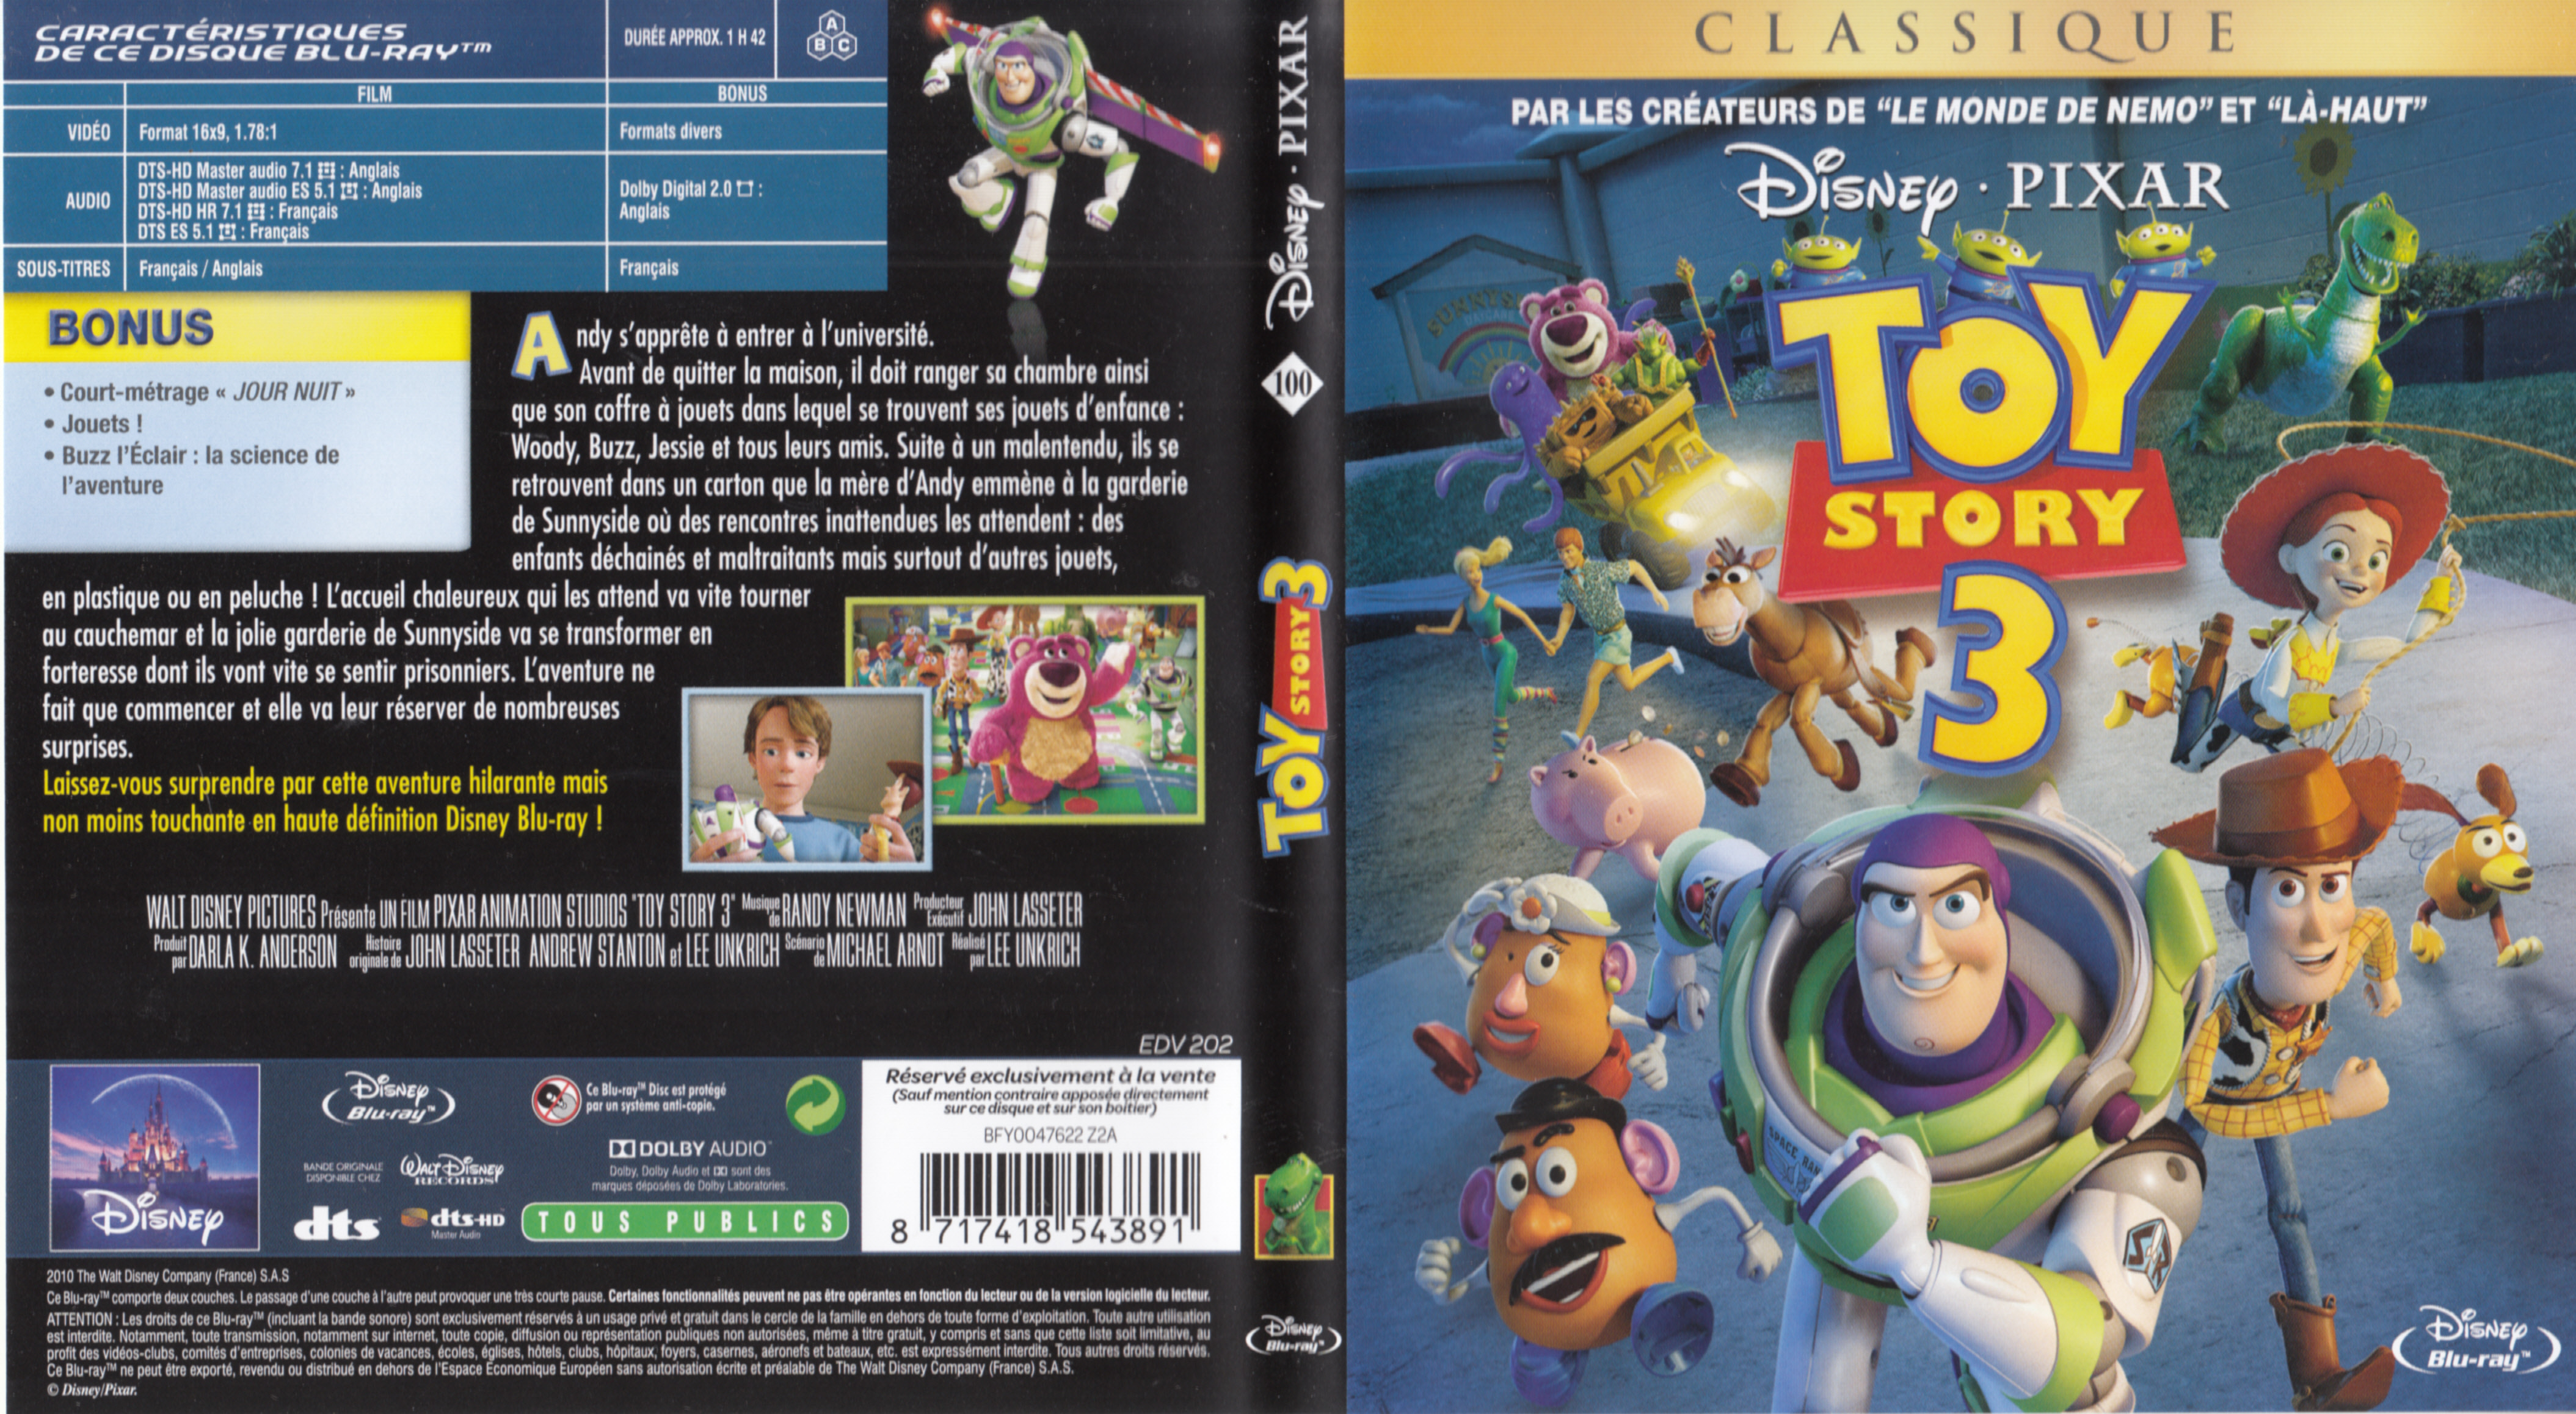 Jaquette DVD Toy story 3 (BLU-RAY) v2